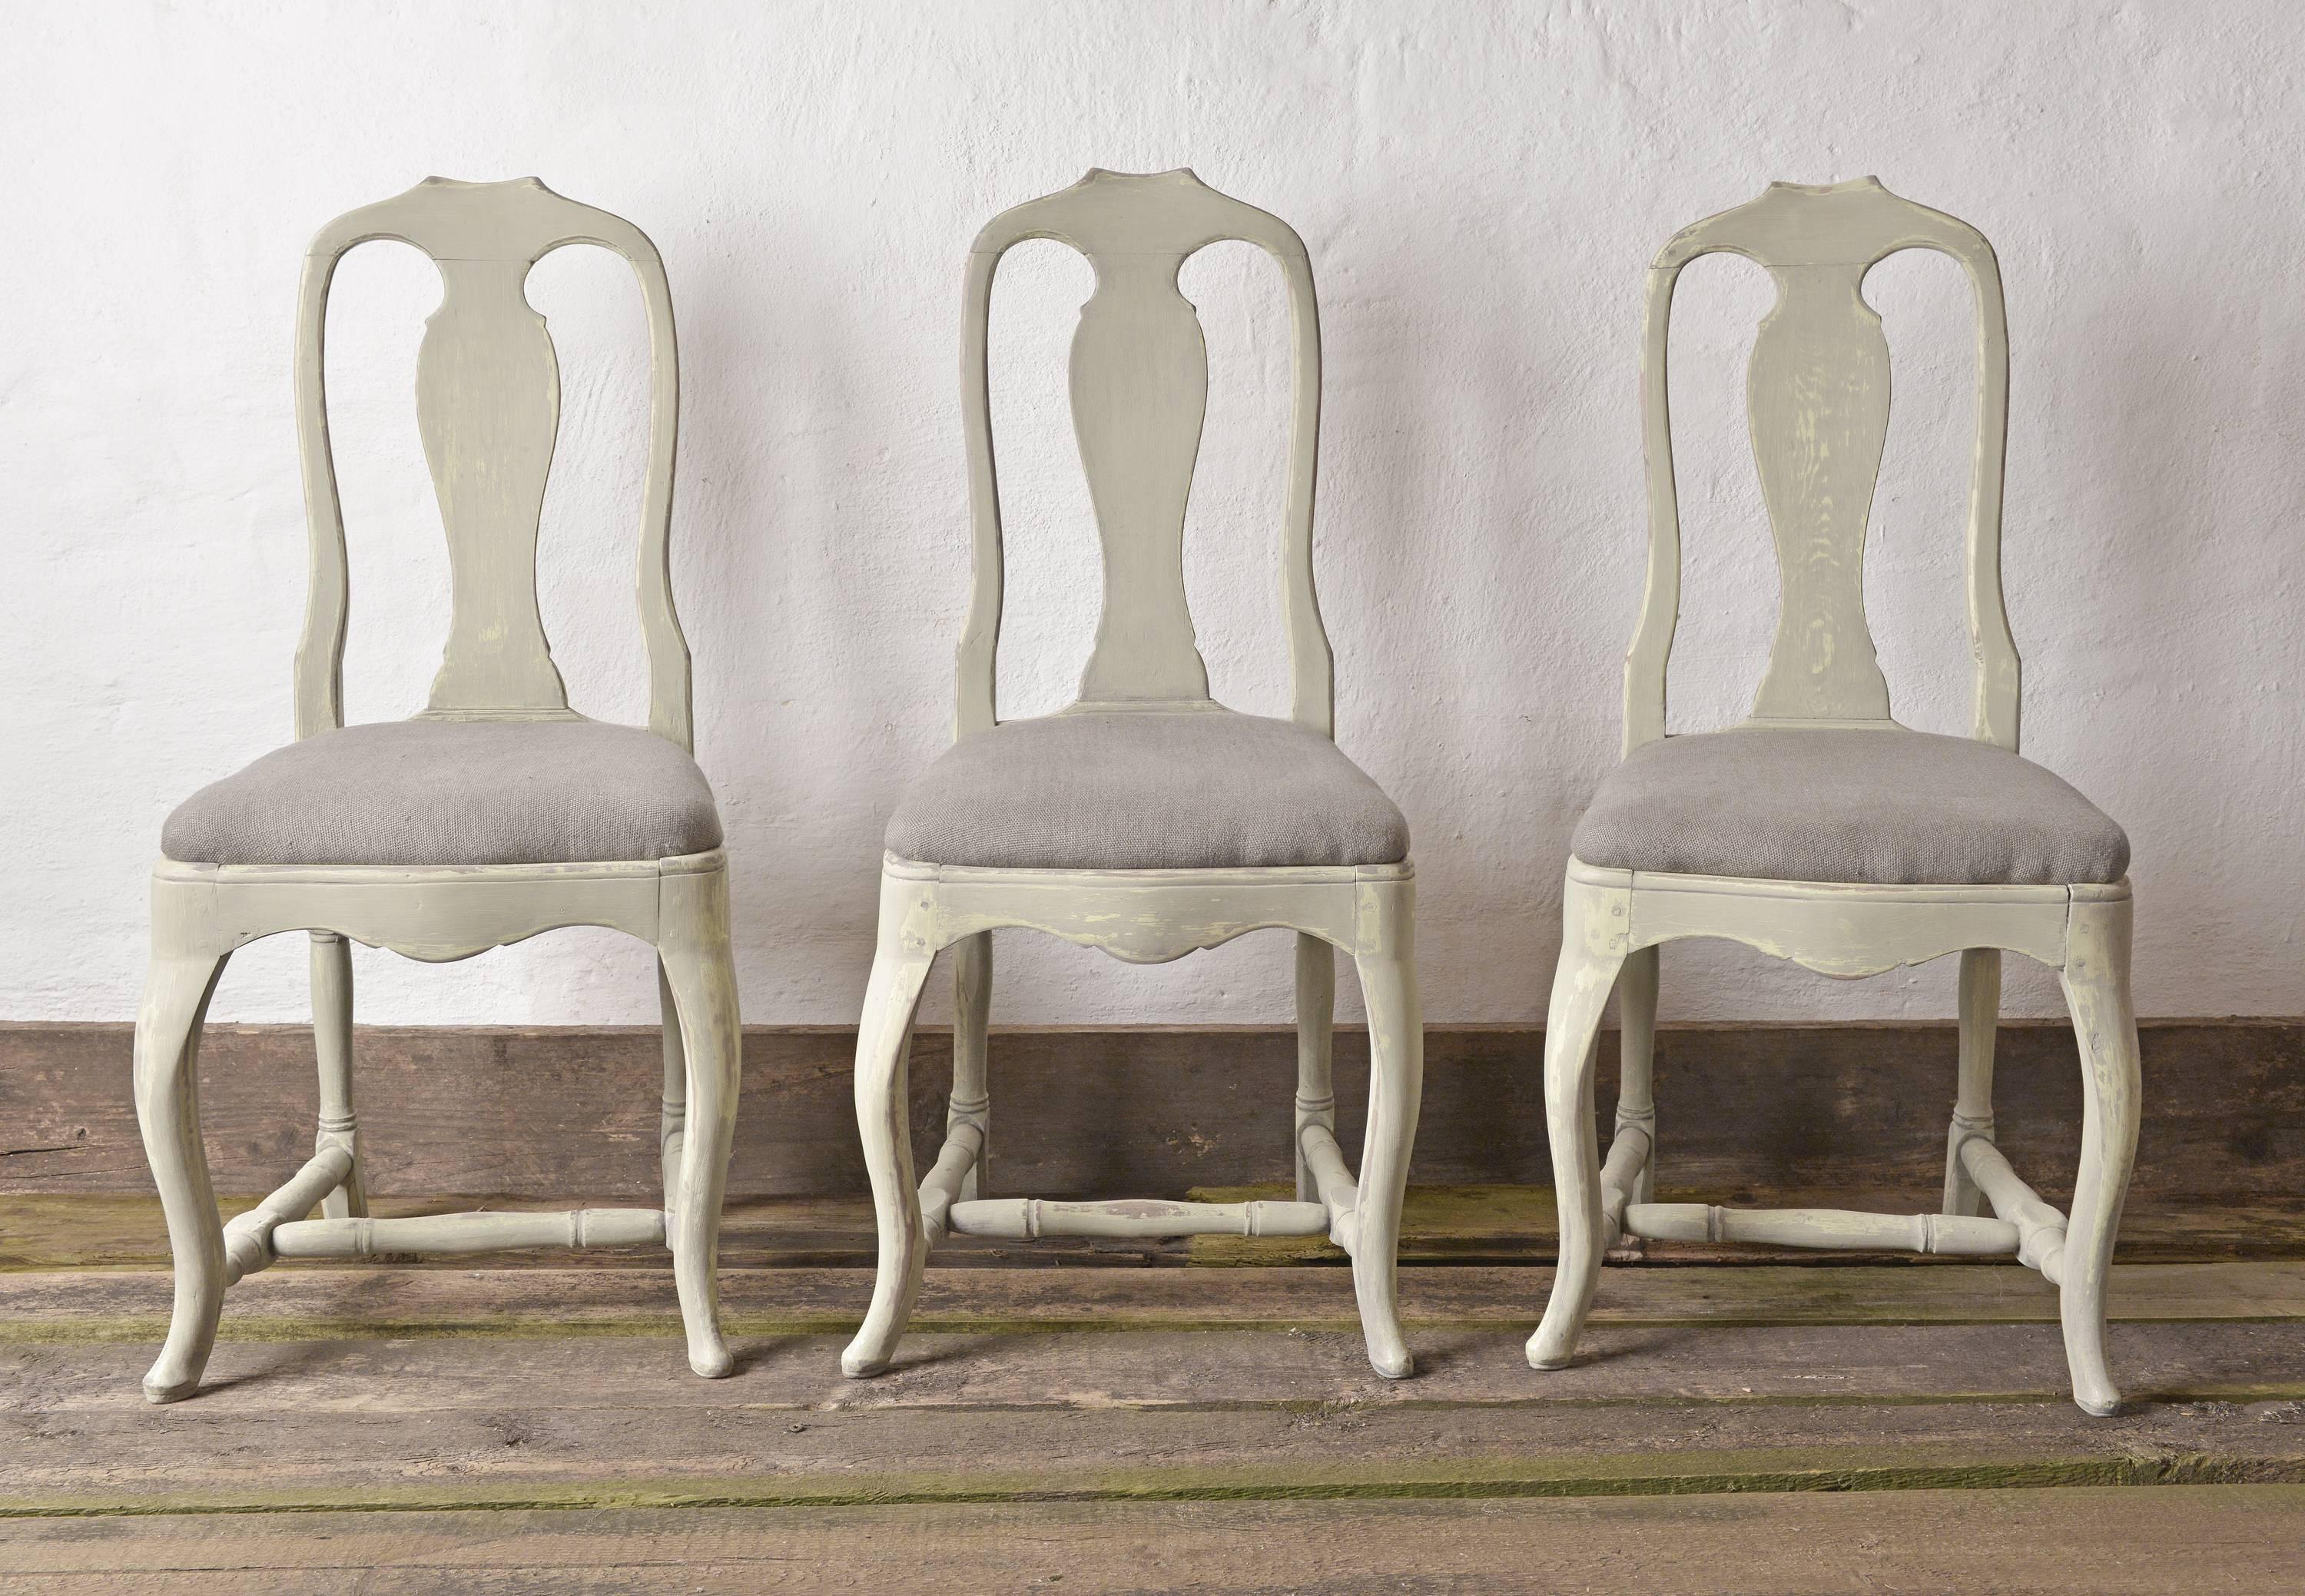 A well preserved set of three Swedish Provincial, circa 1770 dining or side chairs of elegant soft lines in a retouched green-grey paint.
Upholstered in a green-grey linen.